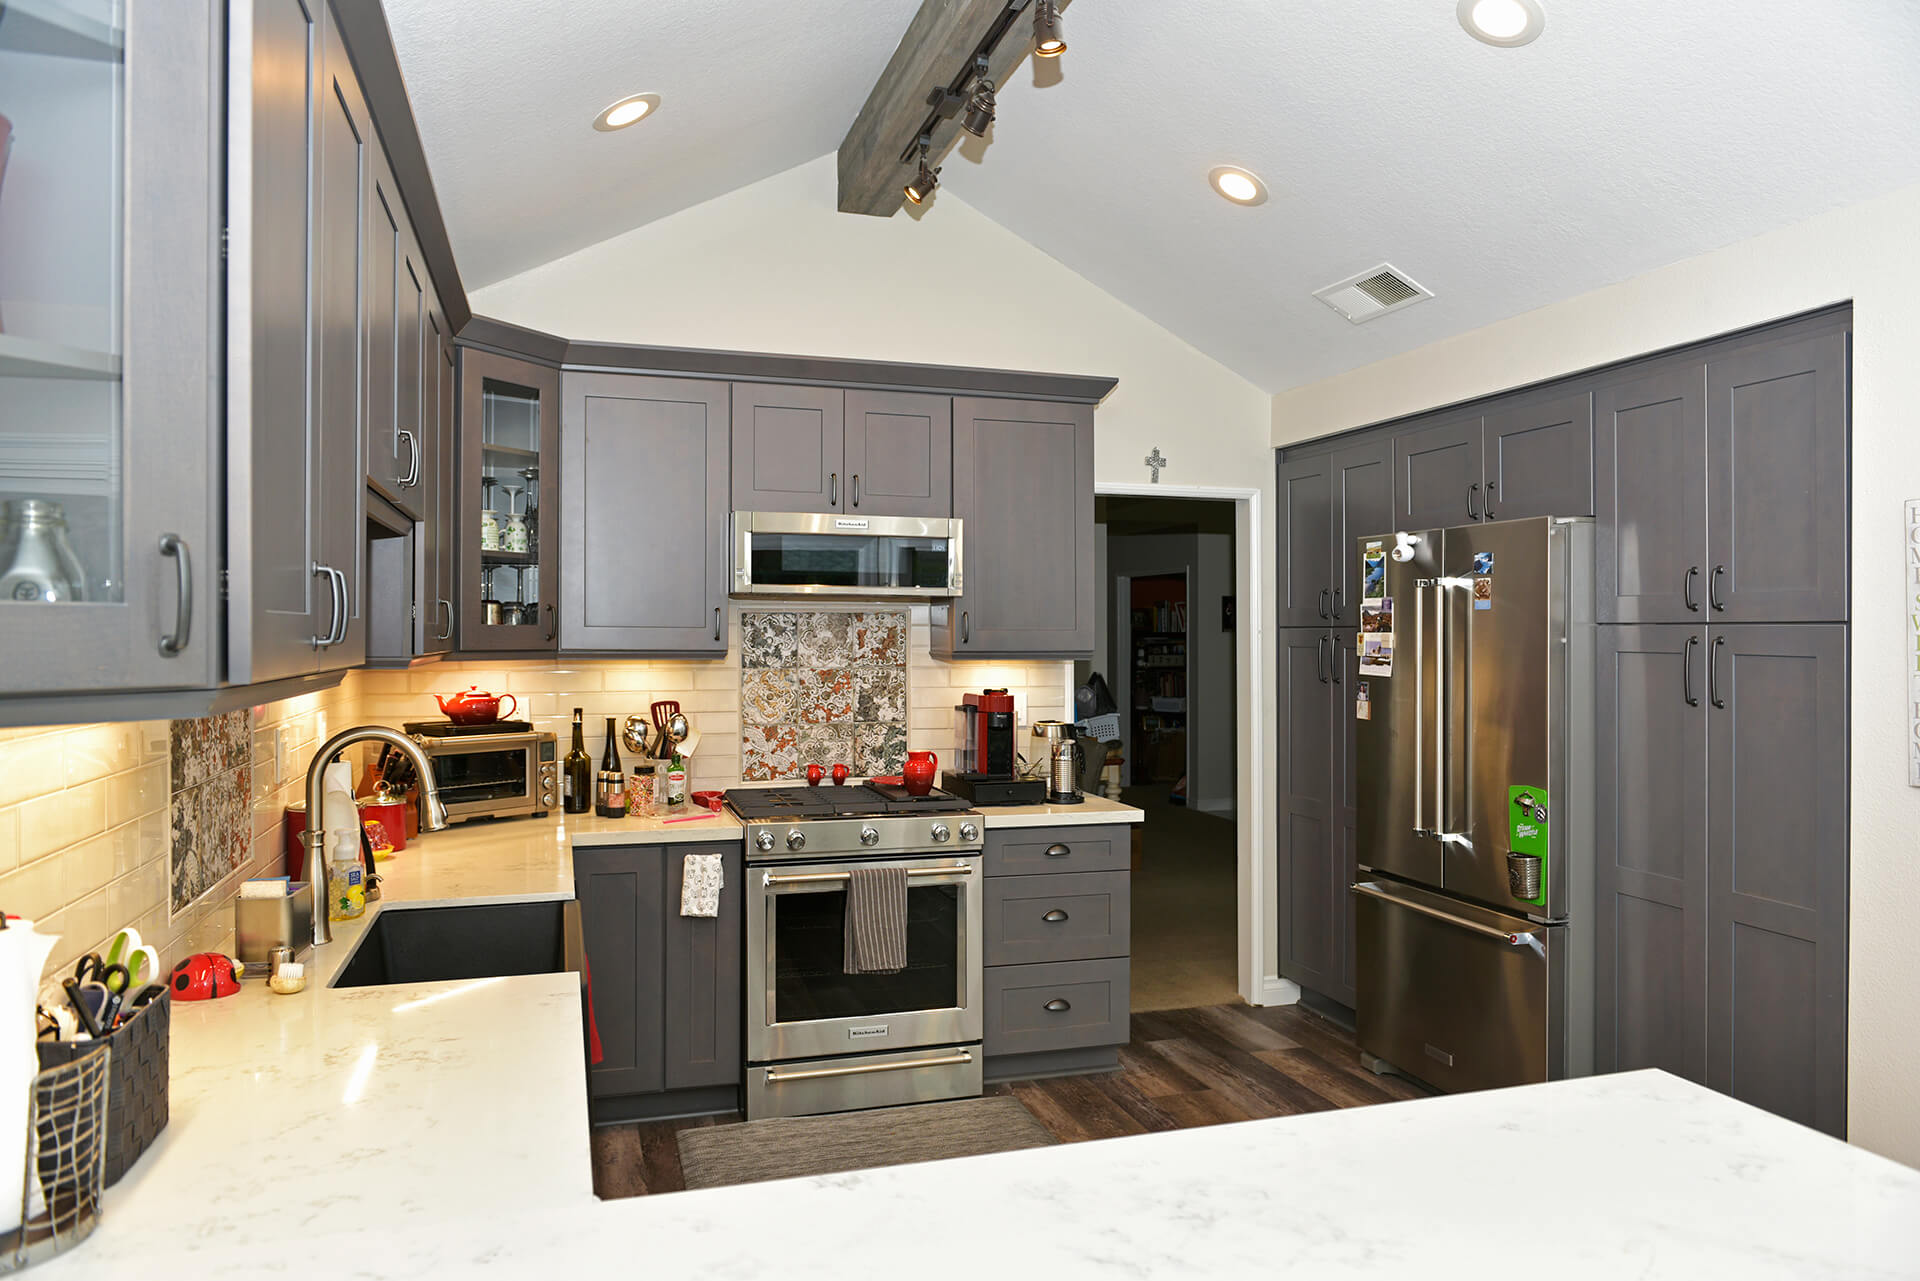 Doug's Kitchen - ArtiCraft Cabinetry - 004